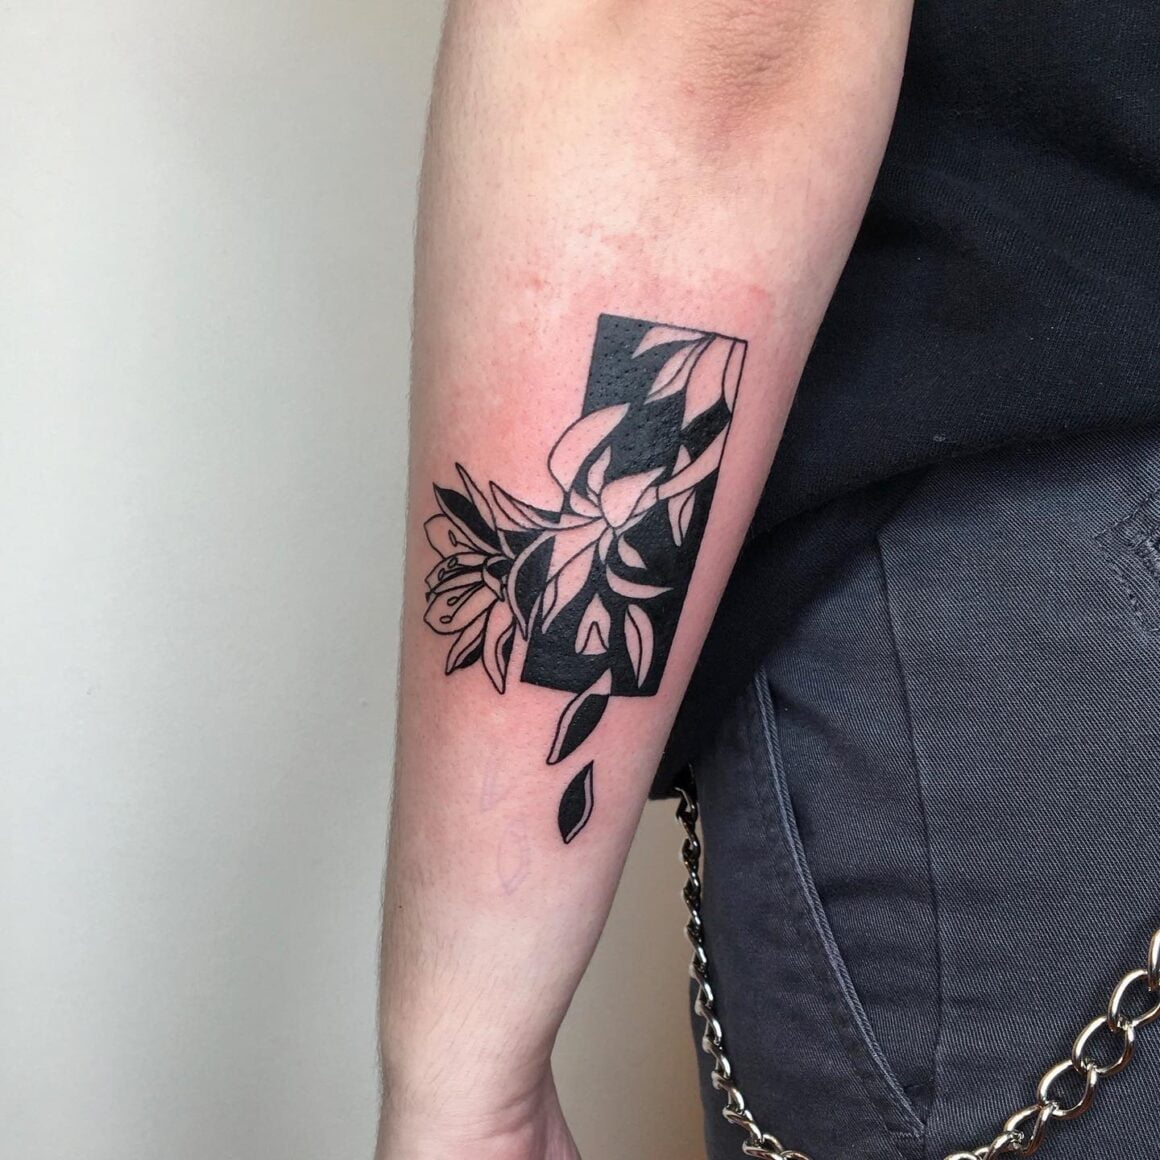 Blackwork Negative Space Tattoo To Get Lost In